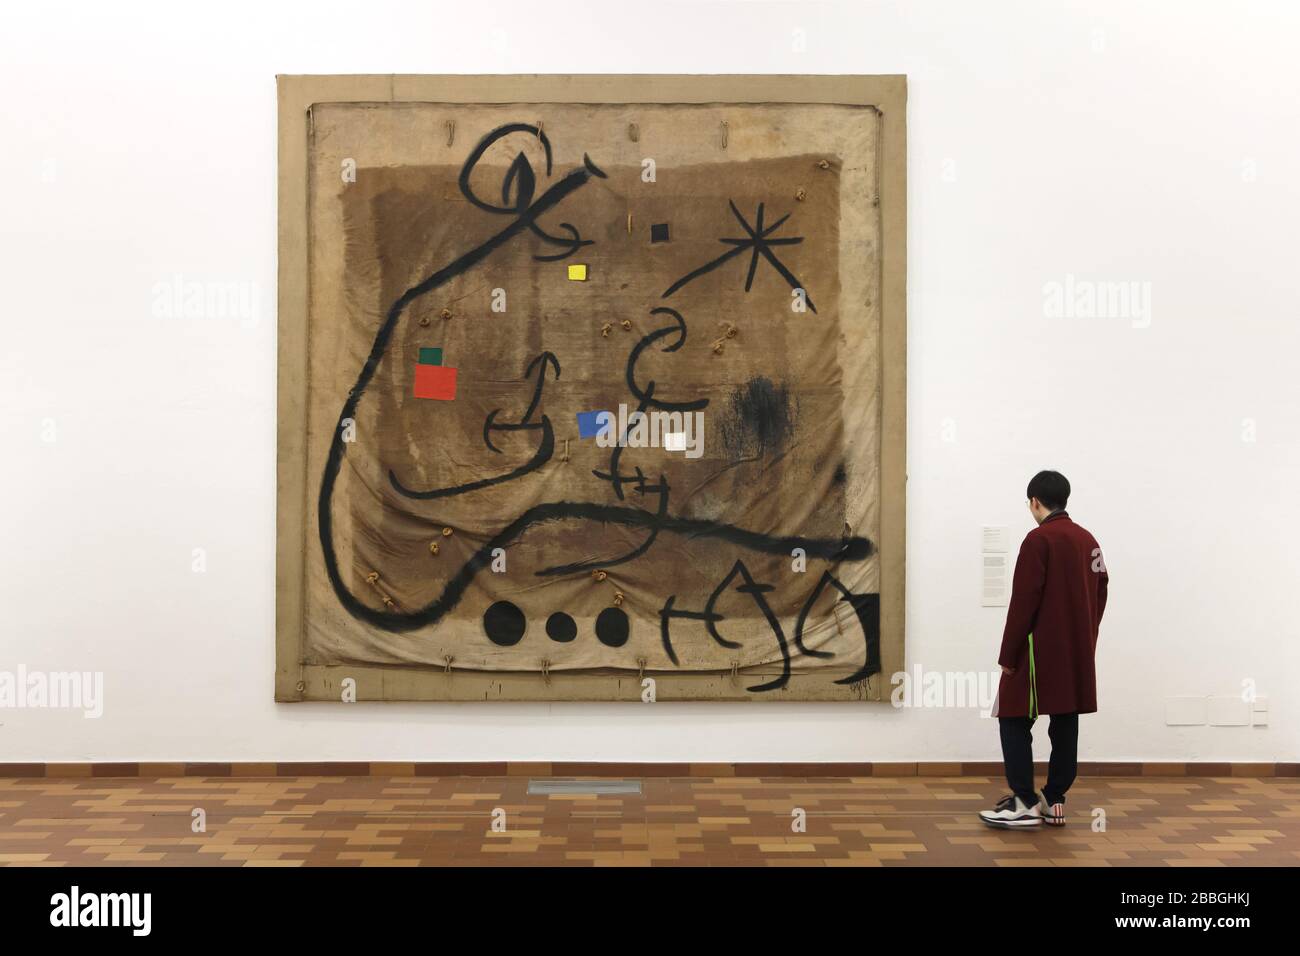 Visitor in front of the painting by Spanish modernist painter Joan Miró entitled 'Woman encircled by a flight of bird in the night' (1968) displayed in the Fundació Joan Miró (Joan Miró Foundation) in Barcelona, Catalonia, Spain. The artwork is painted on the tap used to carry grapes during the harvest. Stock Photo